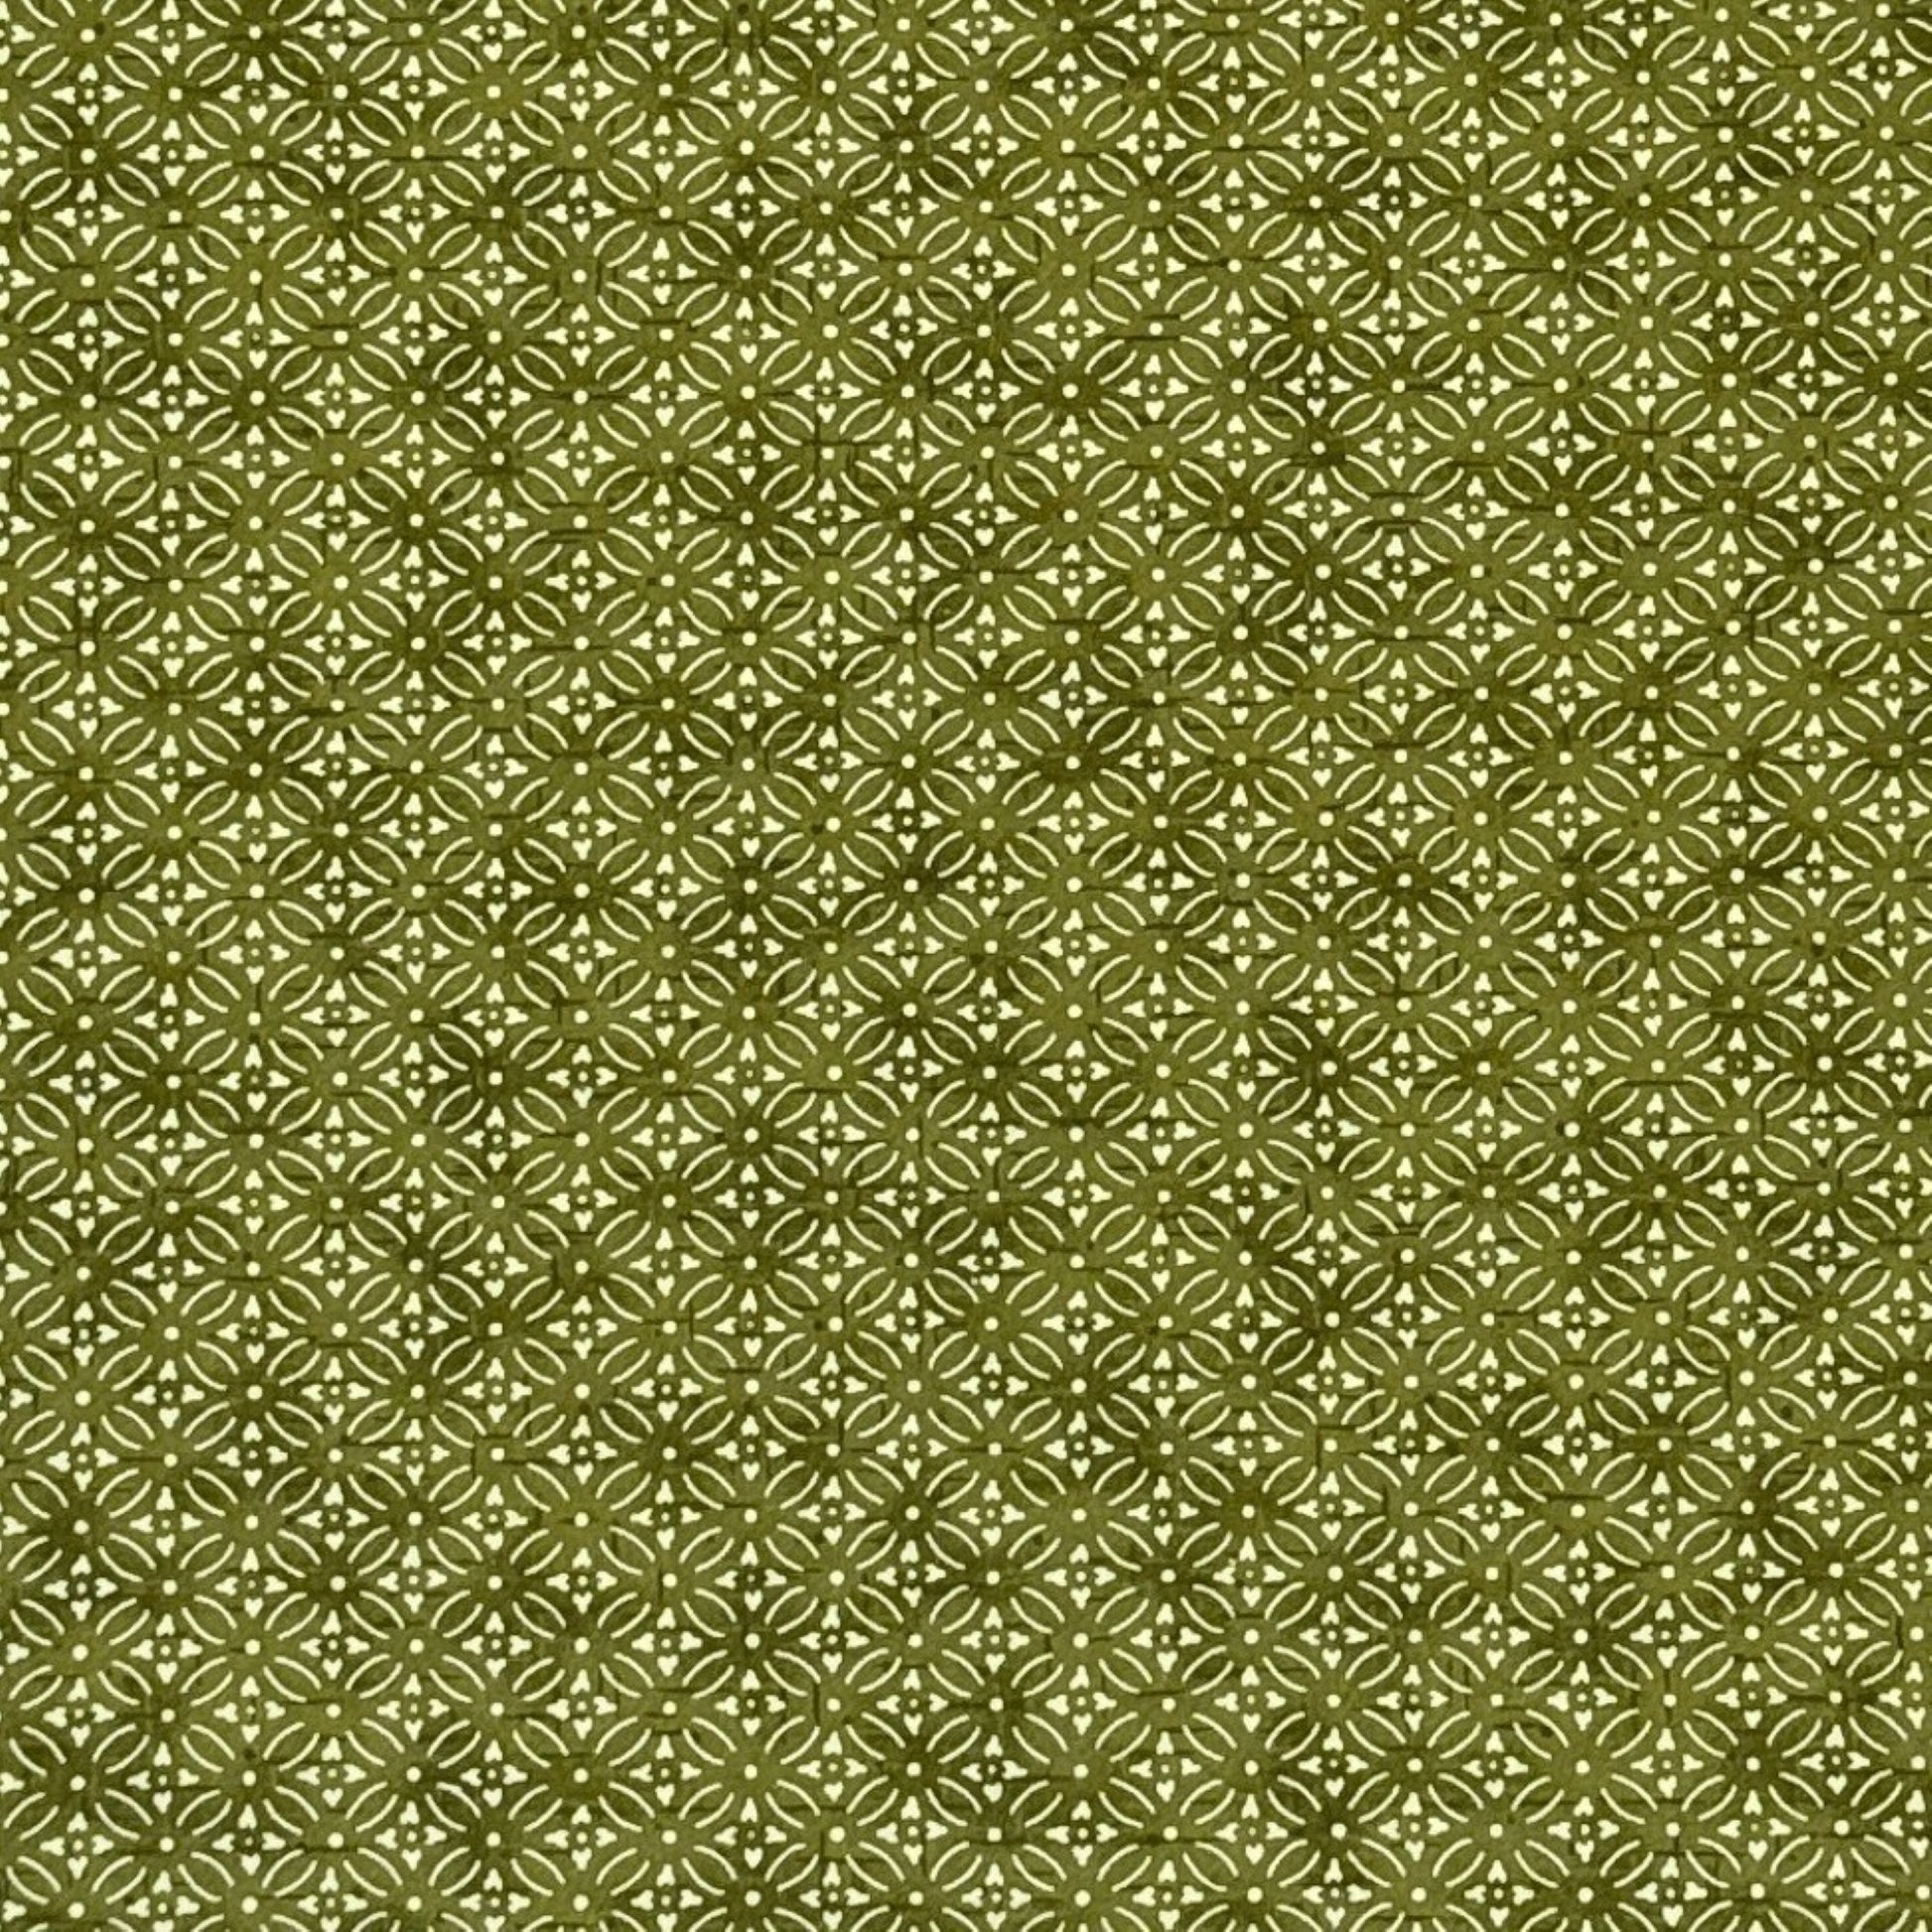 Japanese silkscreen chiyogami paper with a two-tone rich green geometric pattern on creamy white